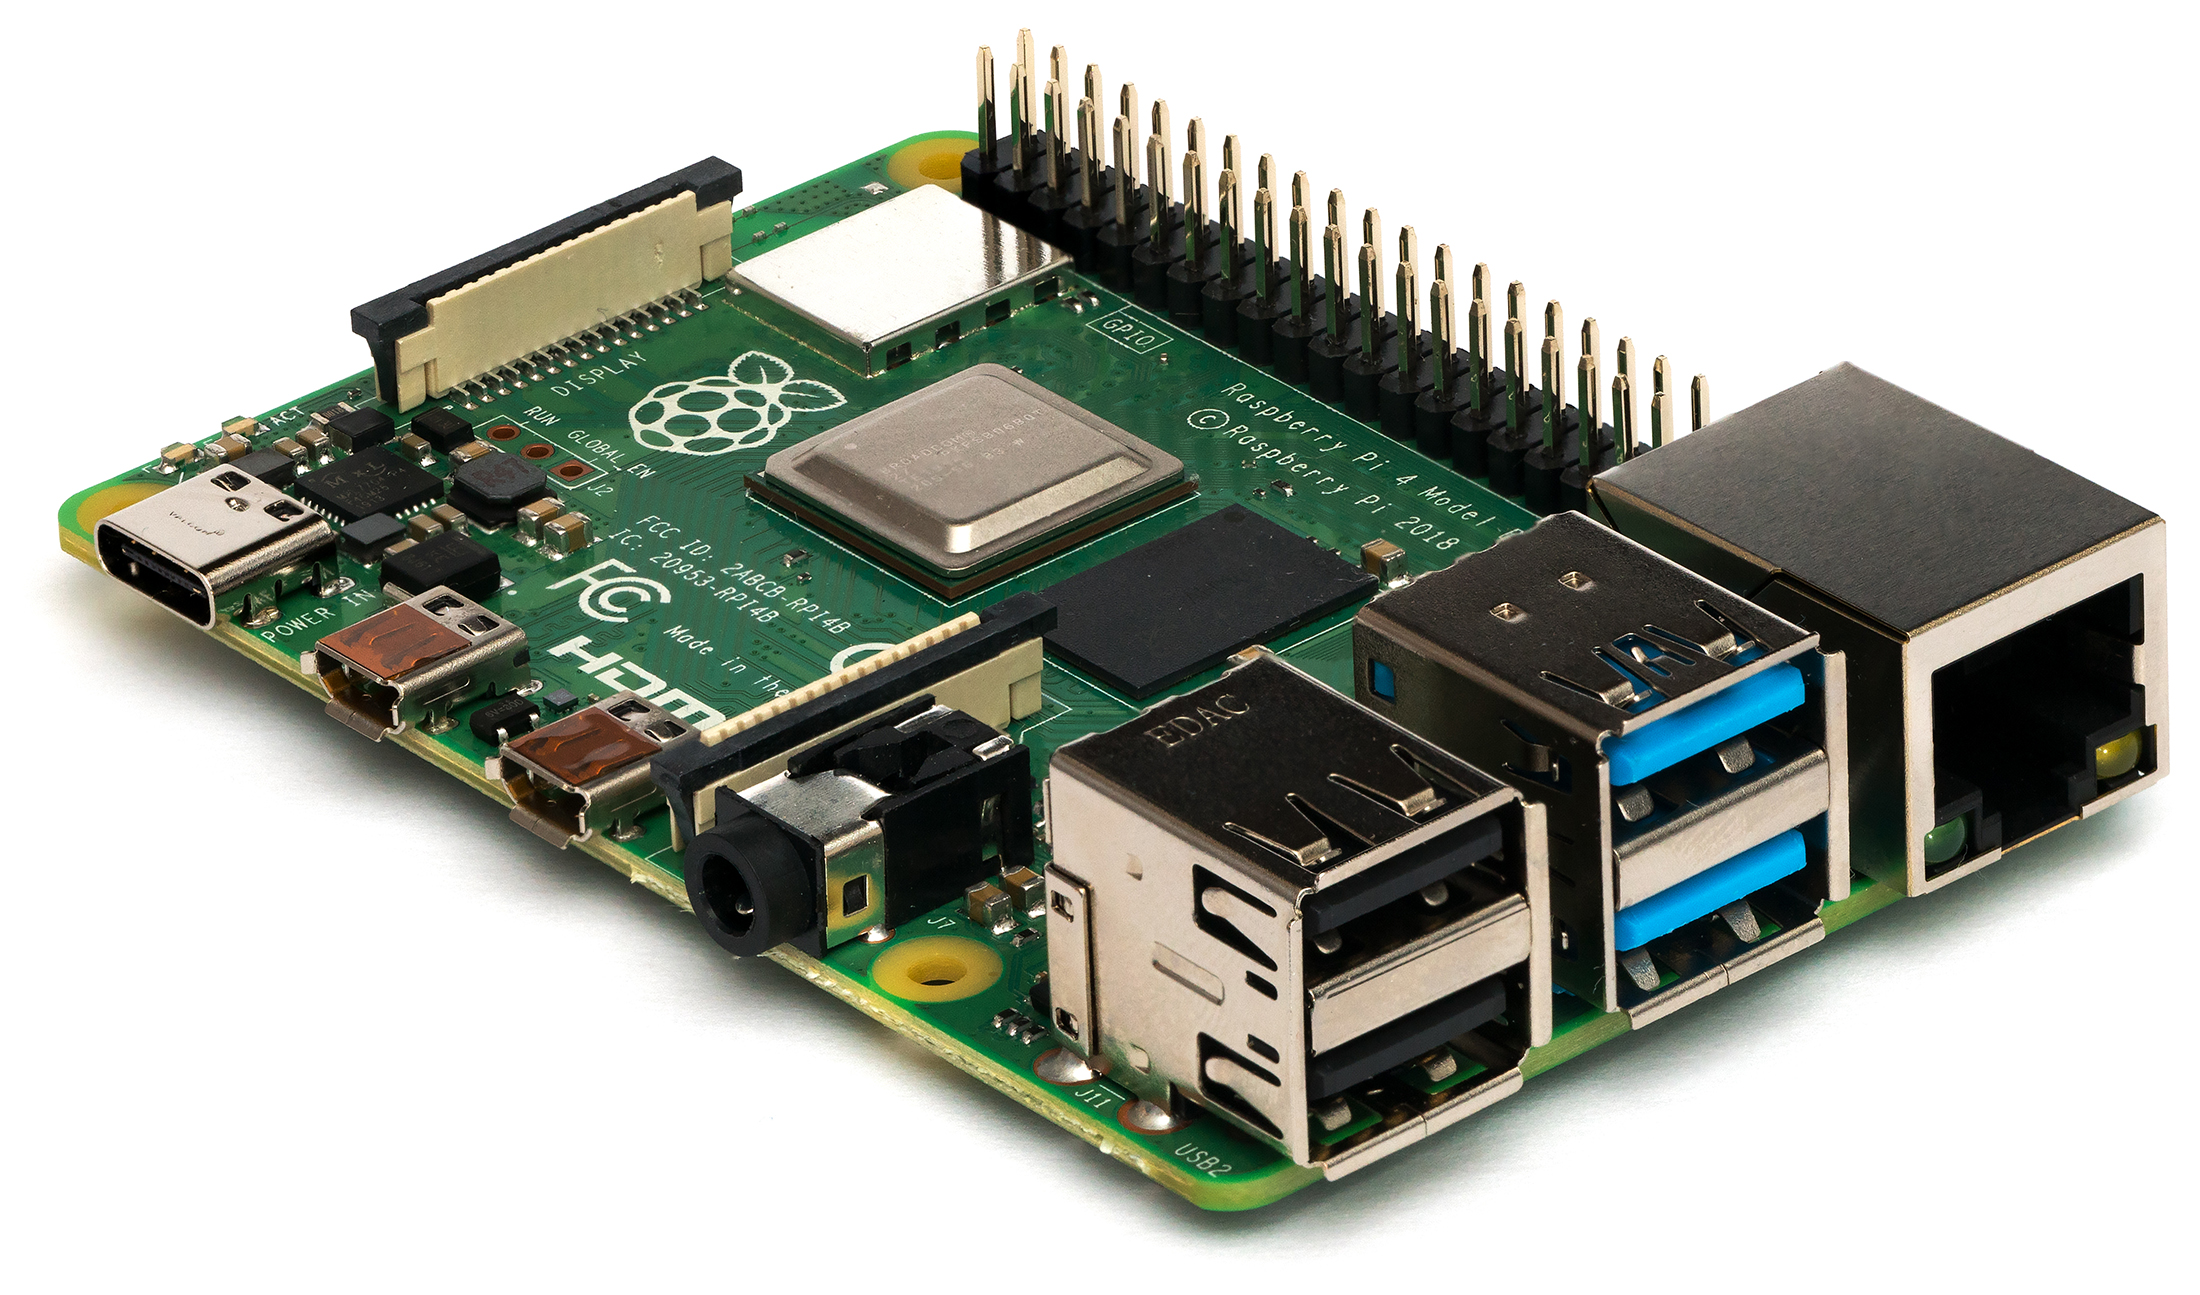 Sony investment will put AI chips in Raspberry Pi boards